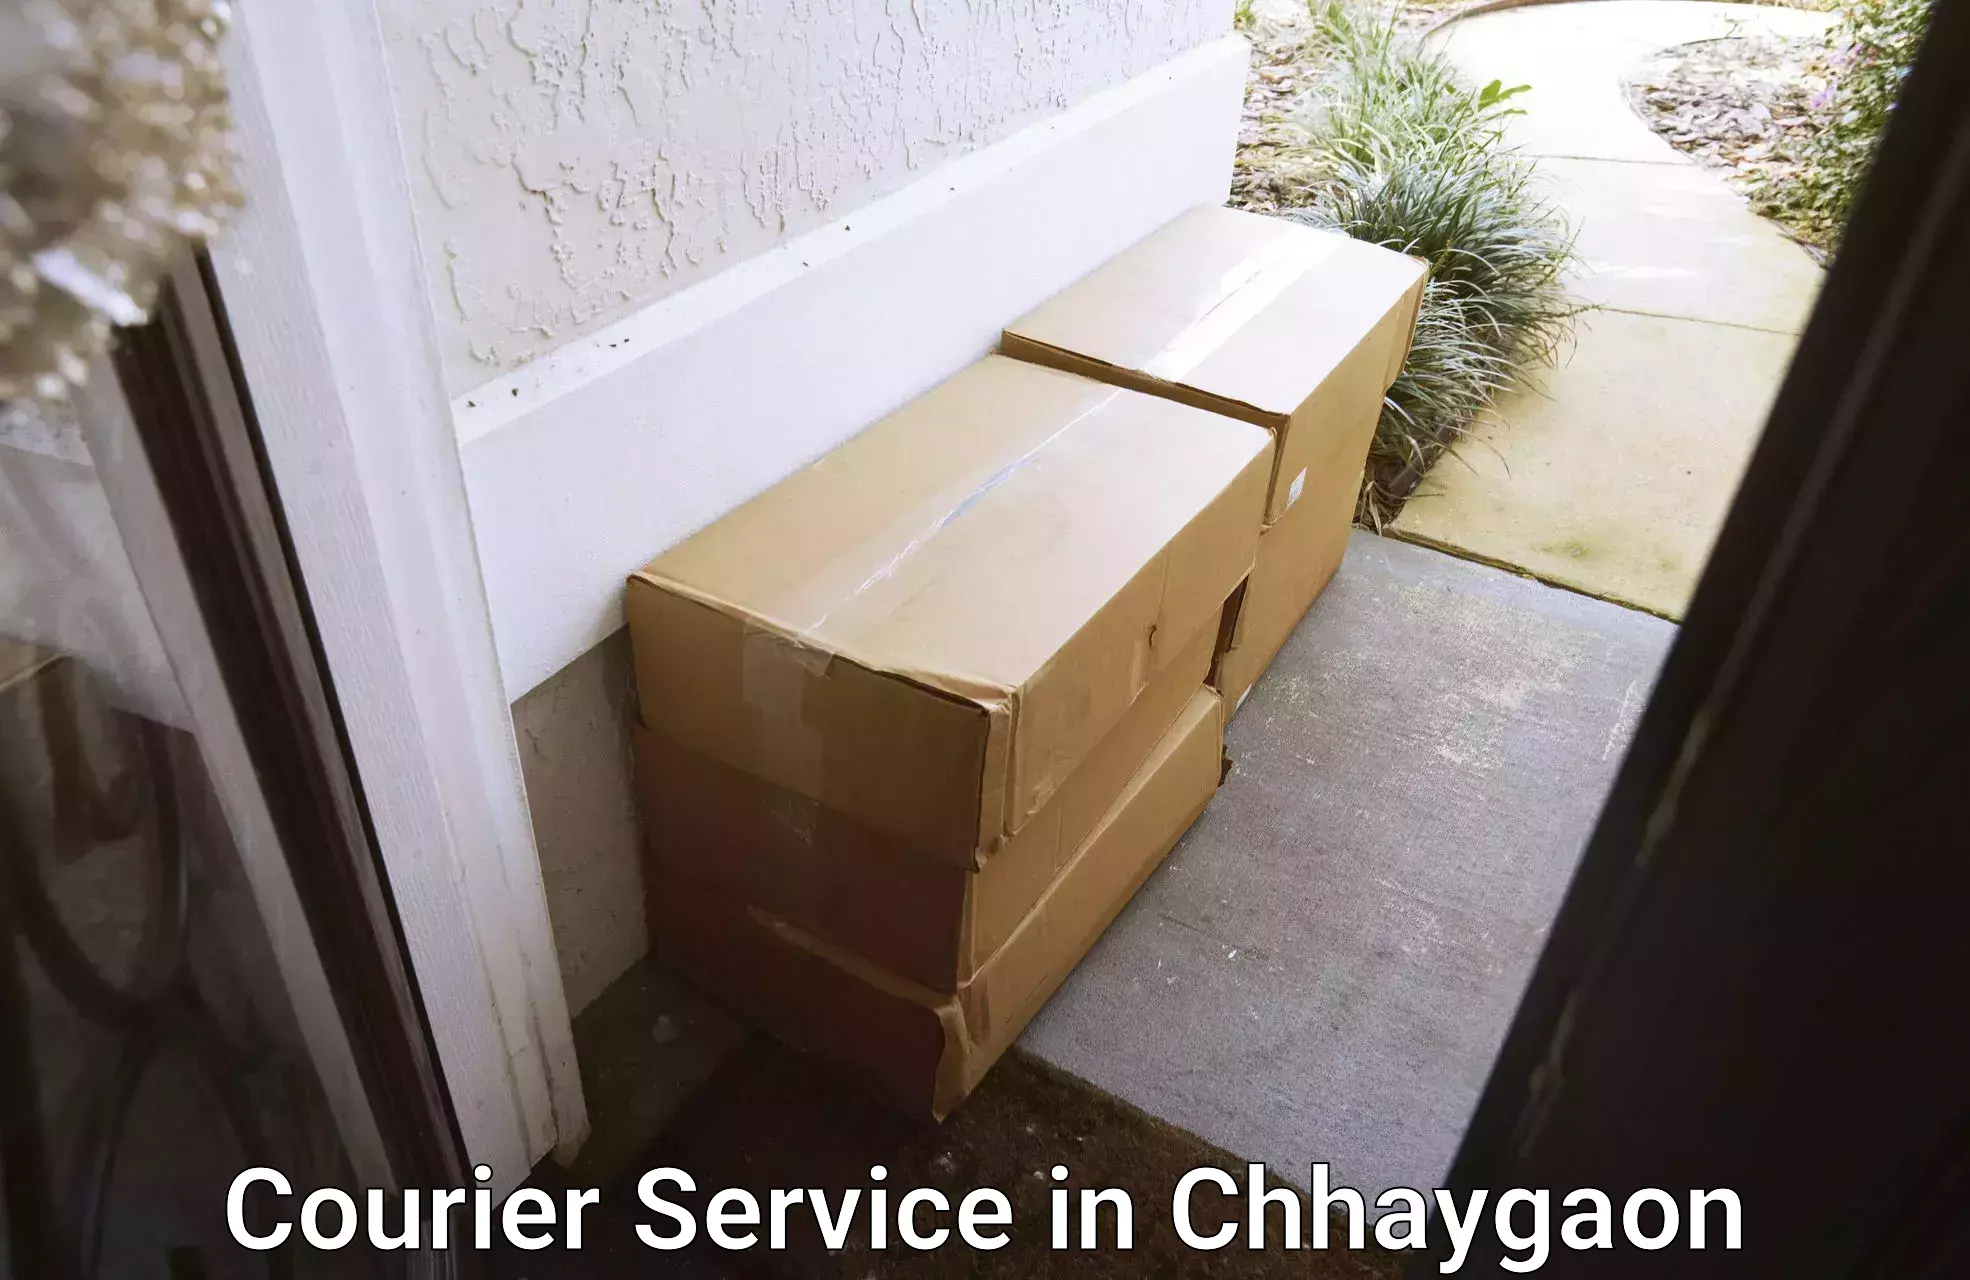 Same-day delivery options in Chhaygaon